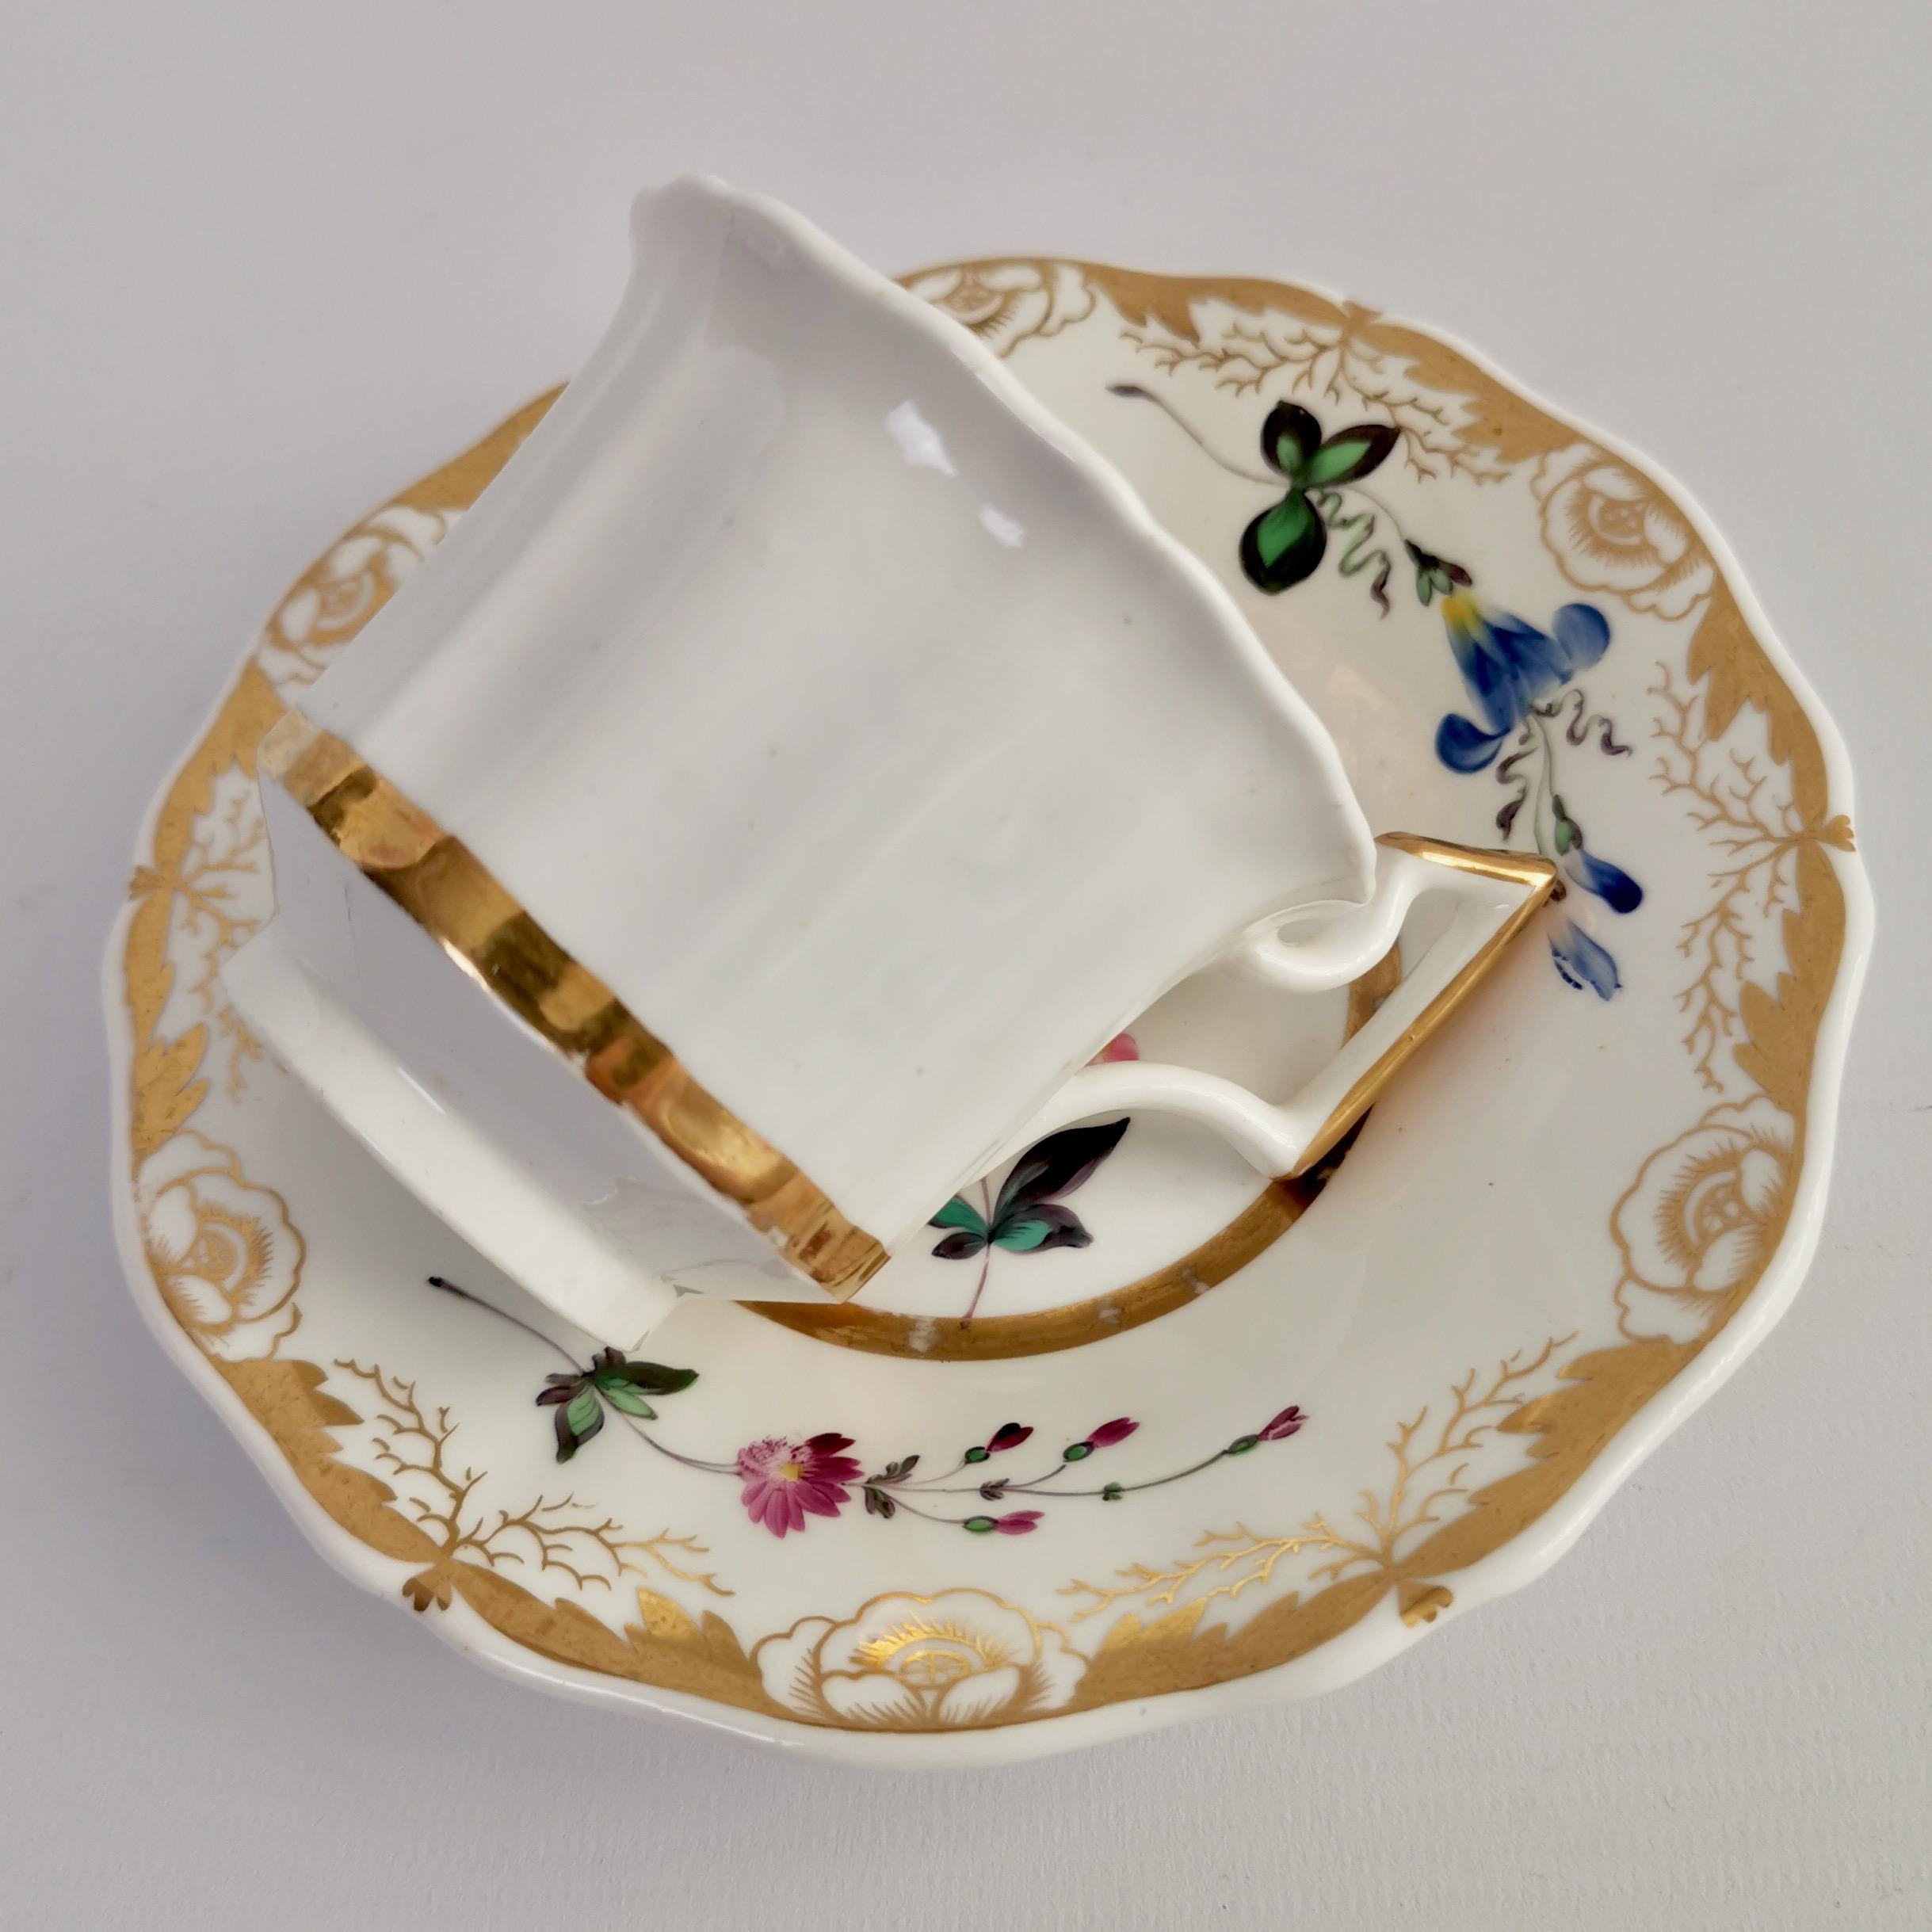 Staffordshire Porcelain Teacup Trio, White with Flowers, Regency, 1825-1830 2